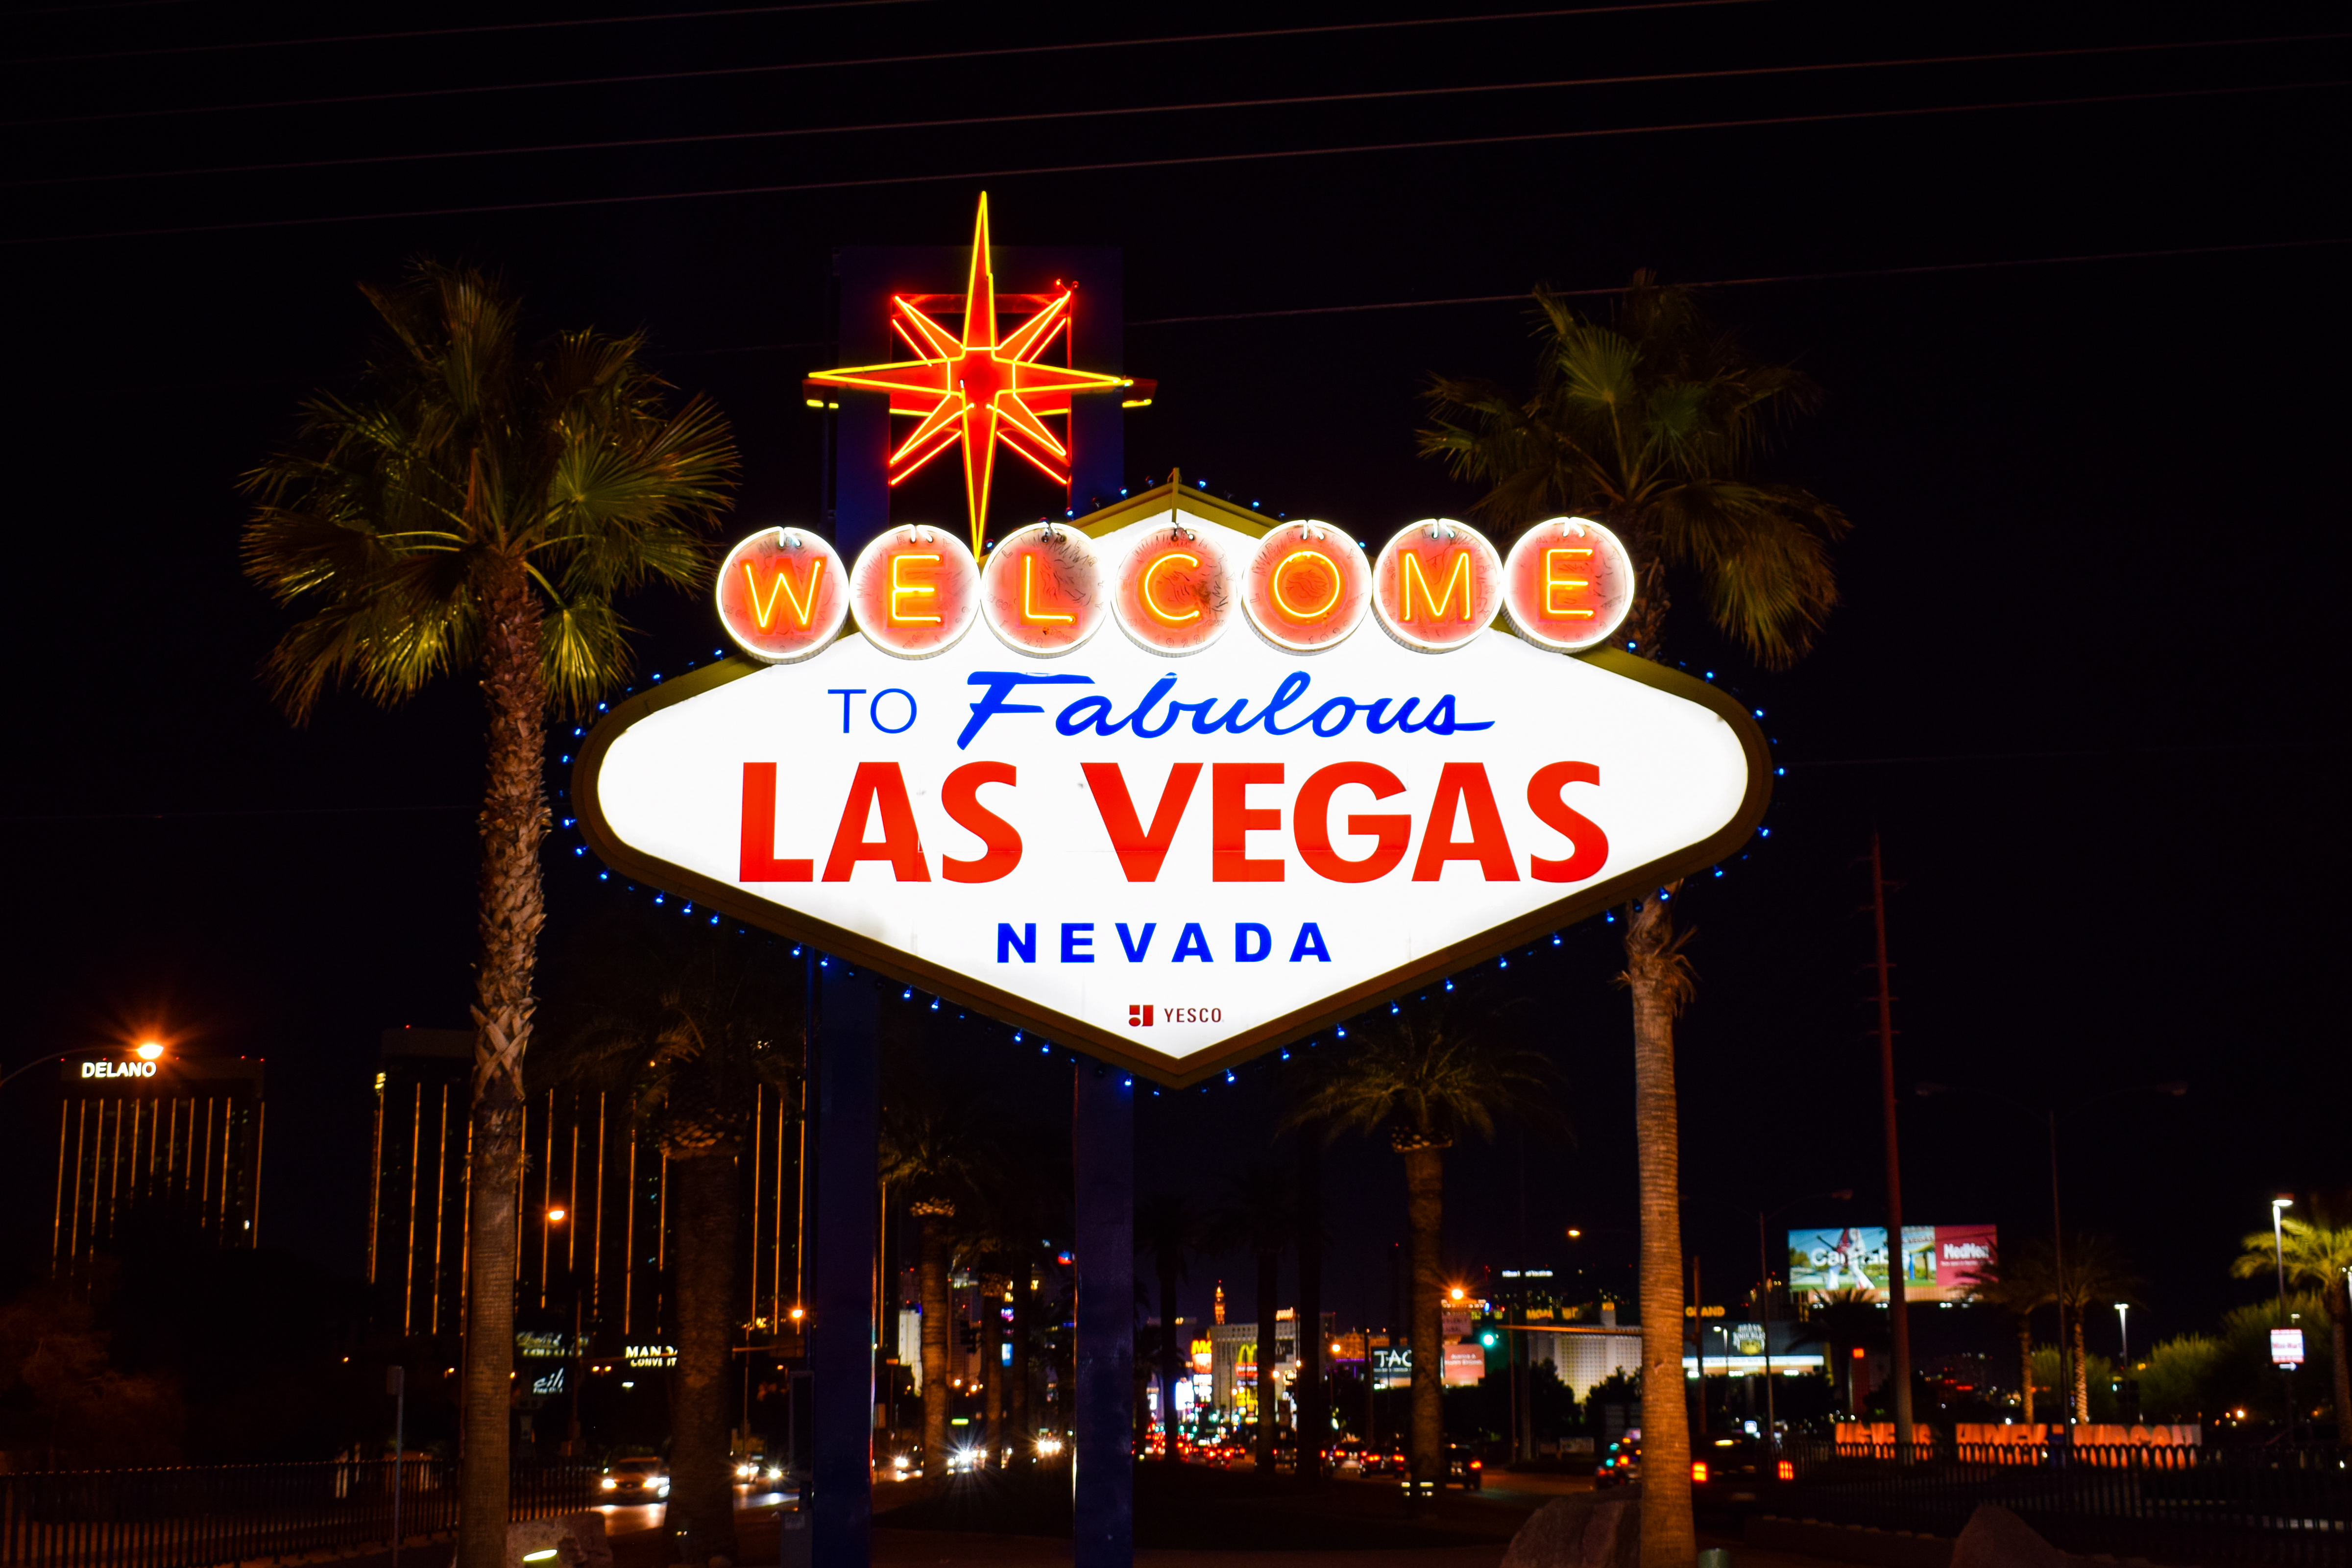 The "Las Vegas" sign stands out in the night. Shutterstock image via Mathieu LE MAUFF